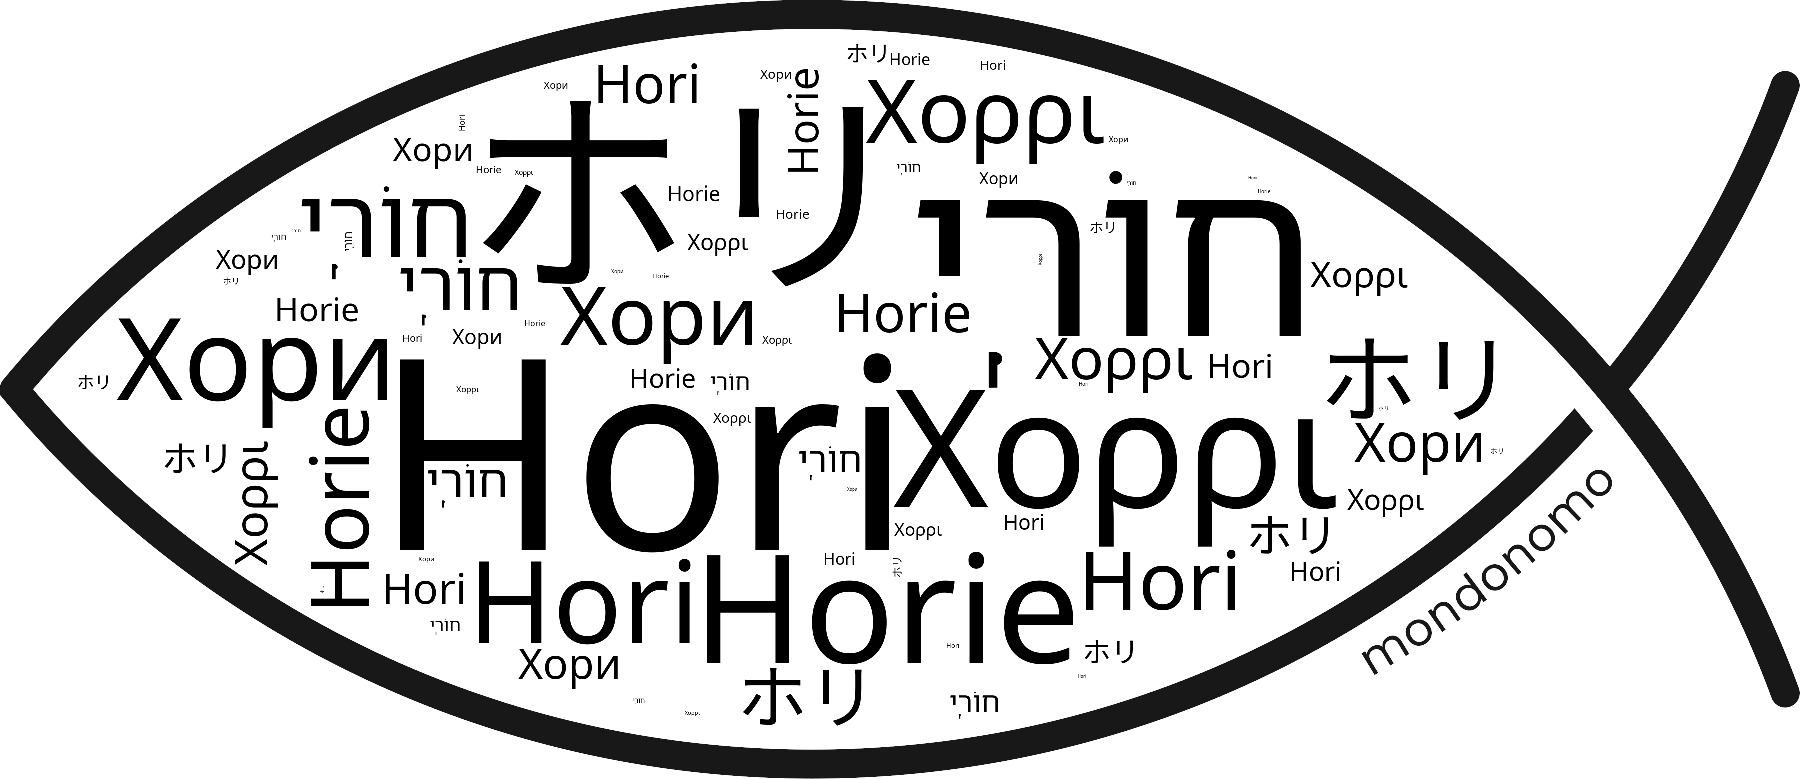 Name Hori in the world's Bibles